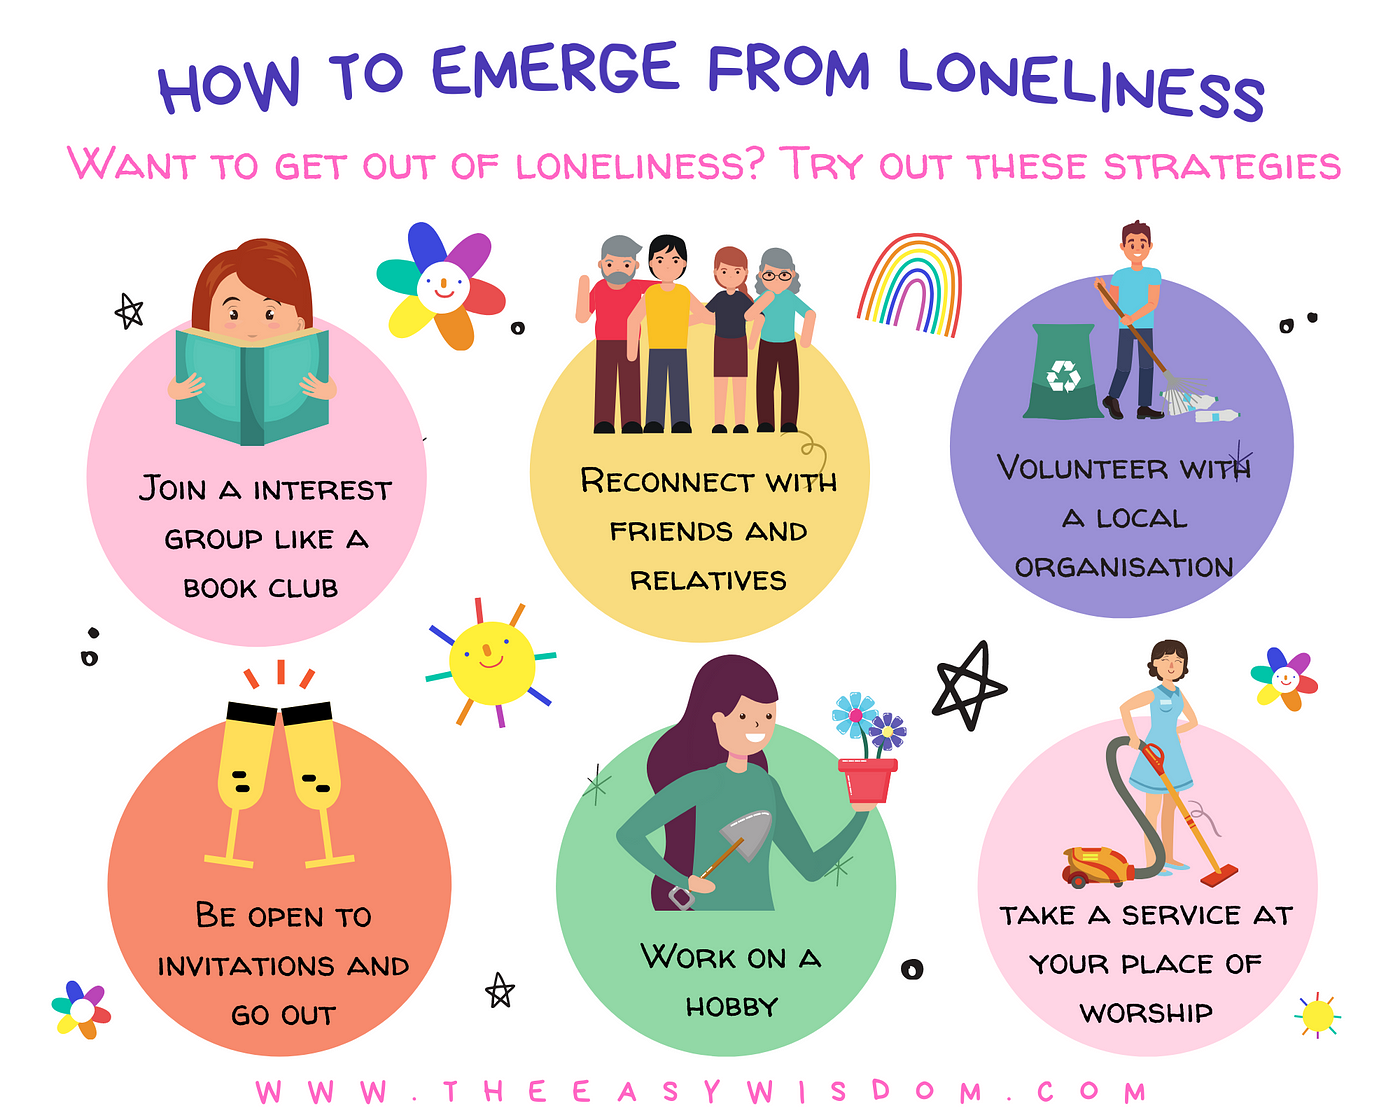 Feeling alone? 5 tips to create connection and combat loneliness - OPB